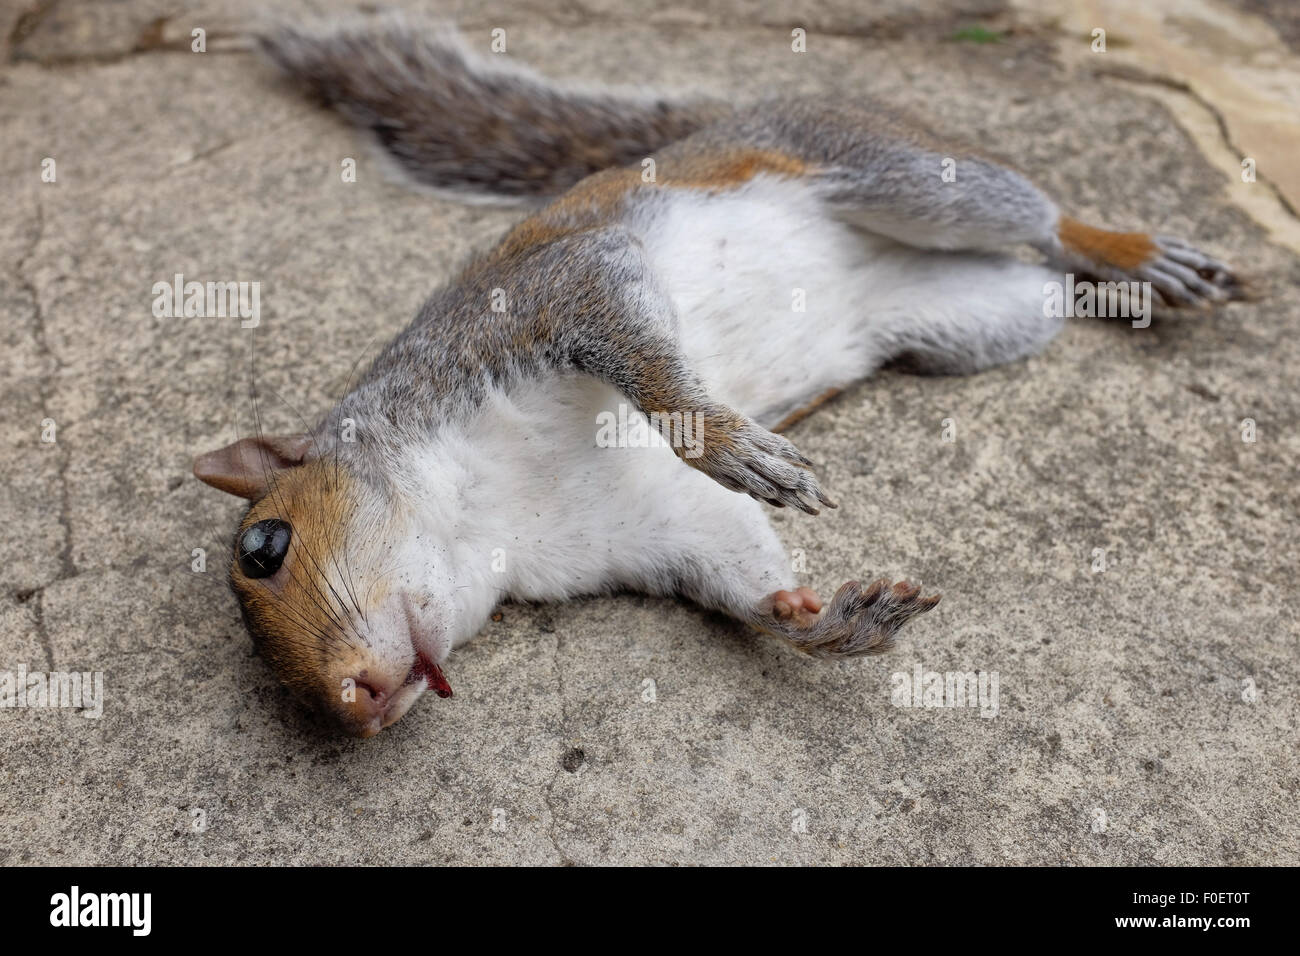 Close-up of a dead squirrel, hit by a car, lying on concrete with a small bloody injury Stock Photo